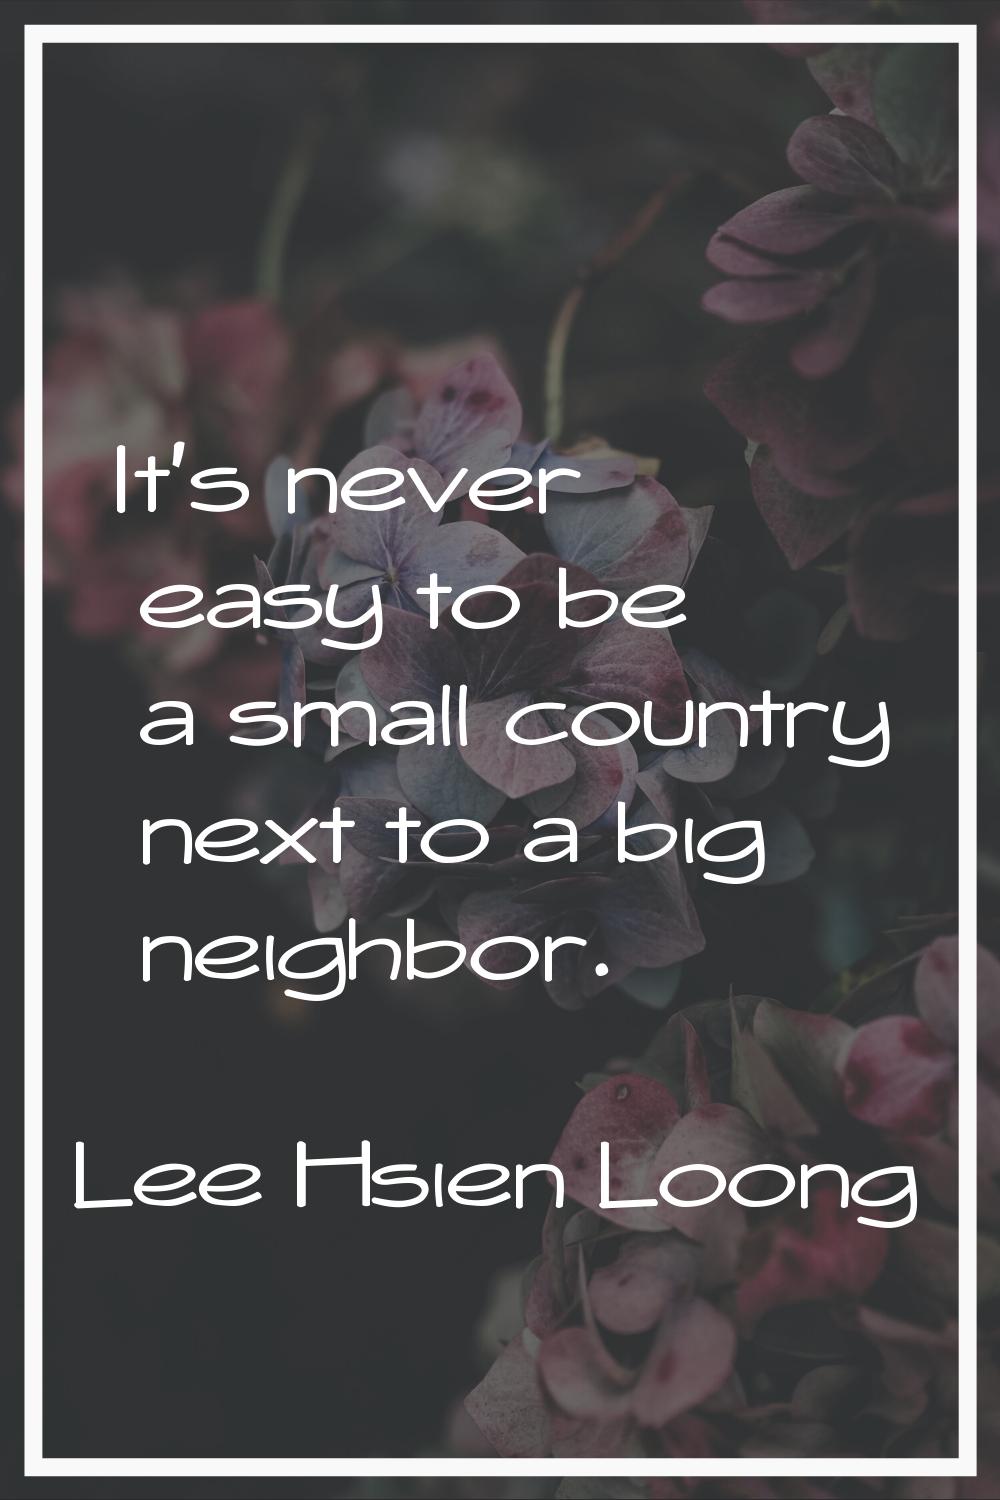 It's never easy to be a small country next to a big neighbor.